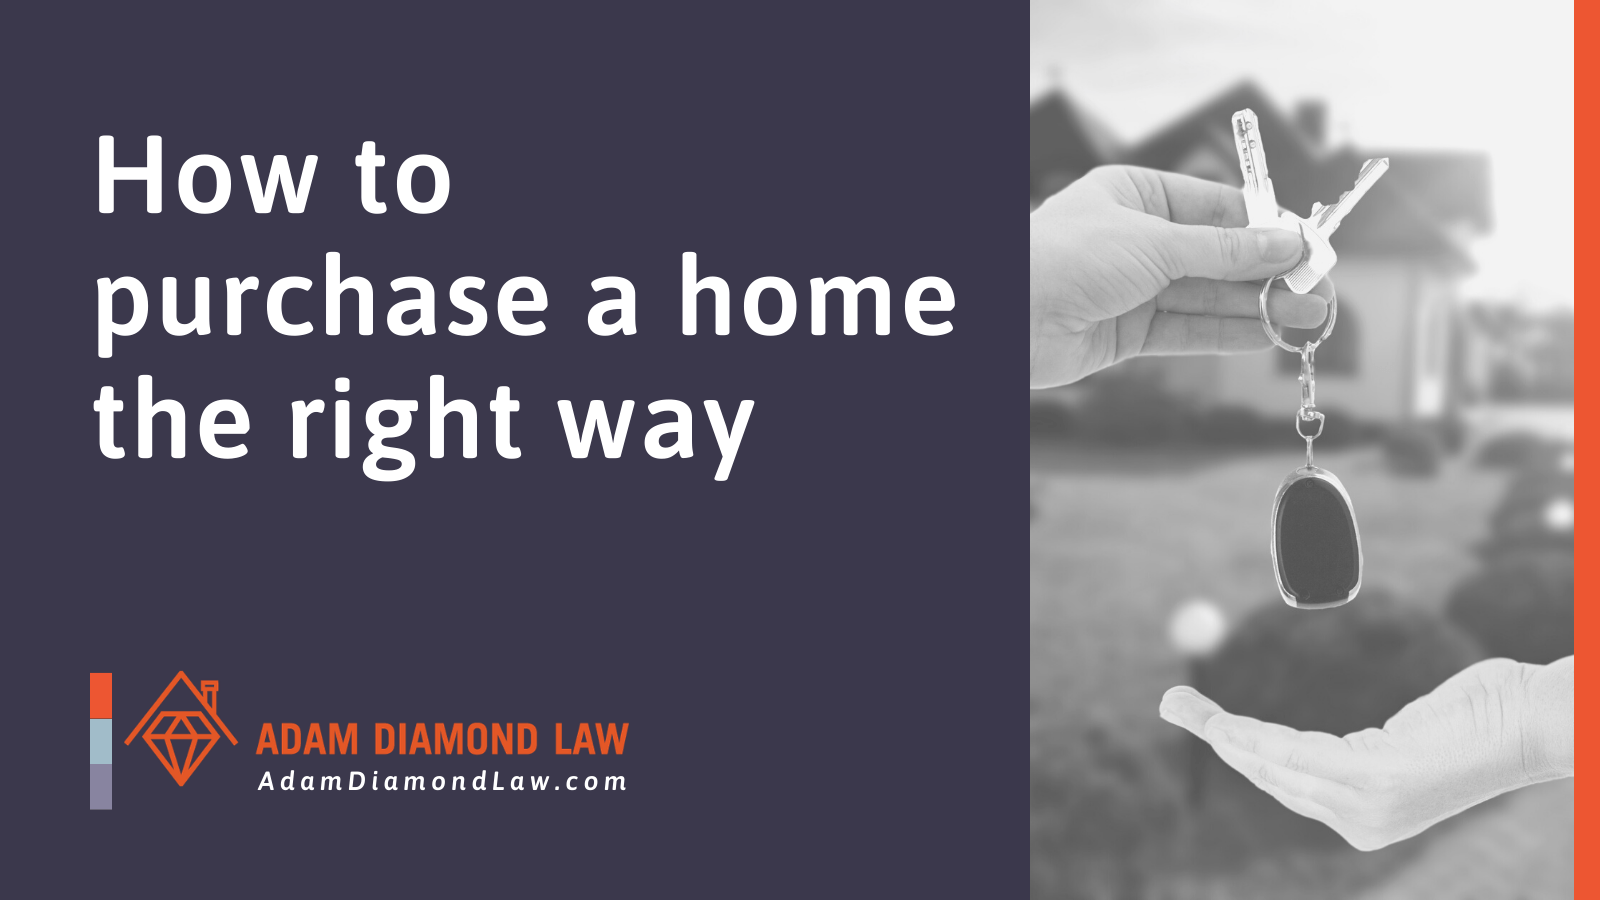 How to purchase a home the right way | Adam Diamond Law